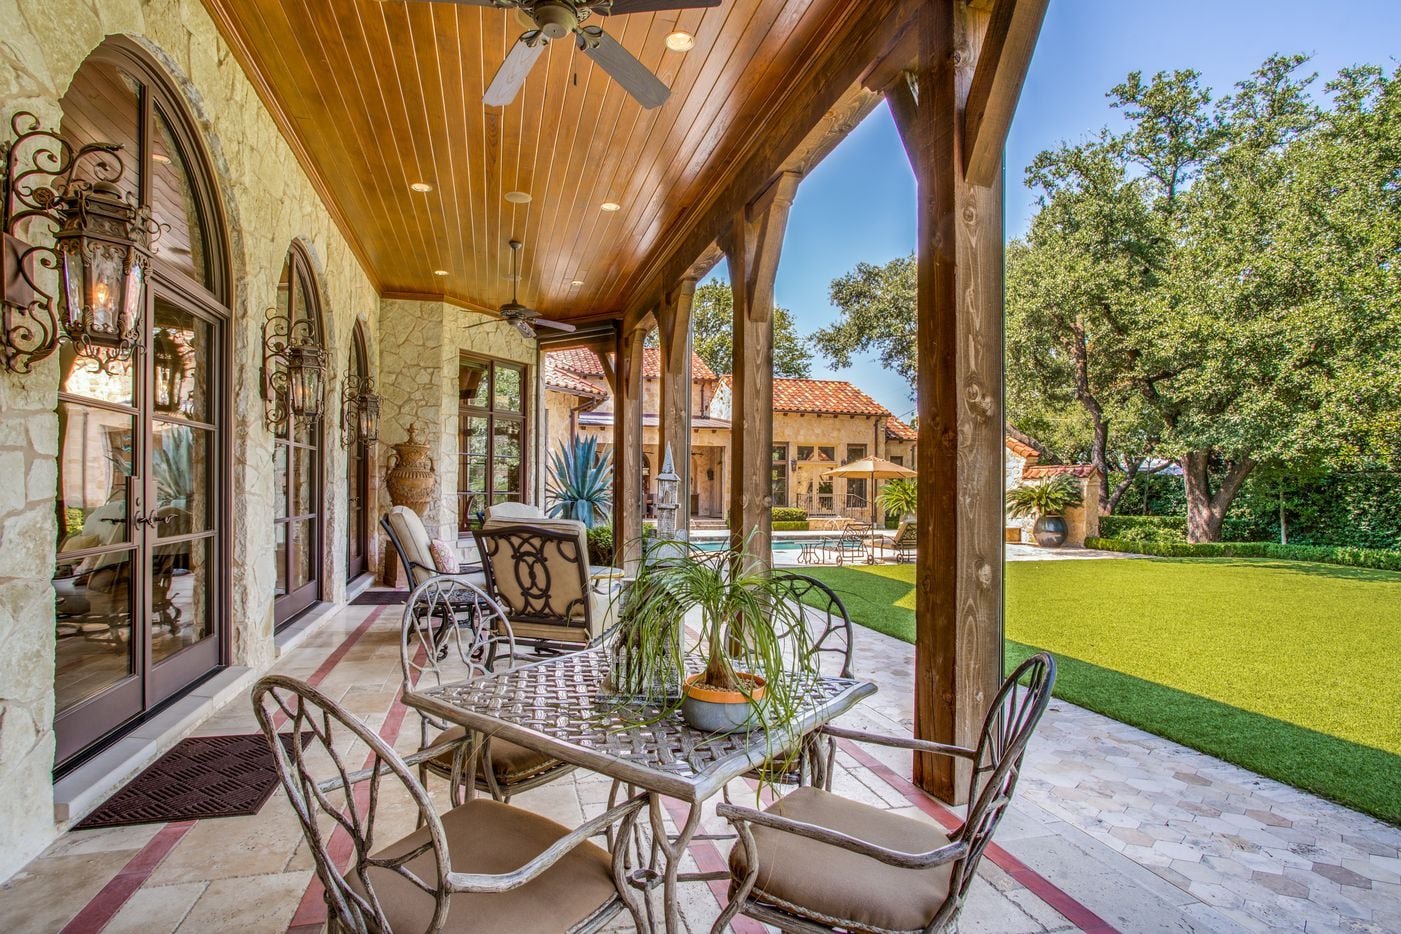 Take a look at the Tuscan style home at 5335 Meaders Lane in Dallas, TX.